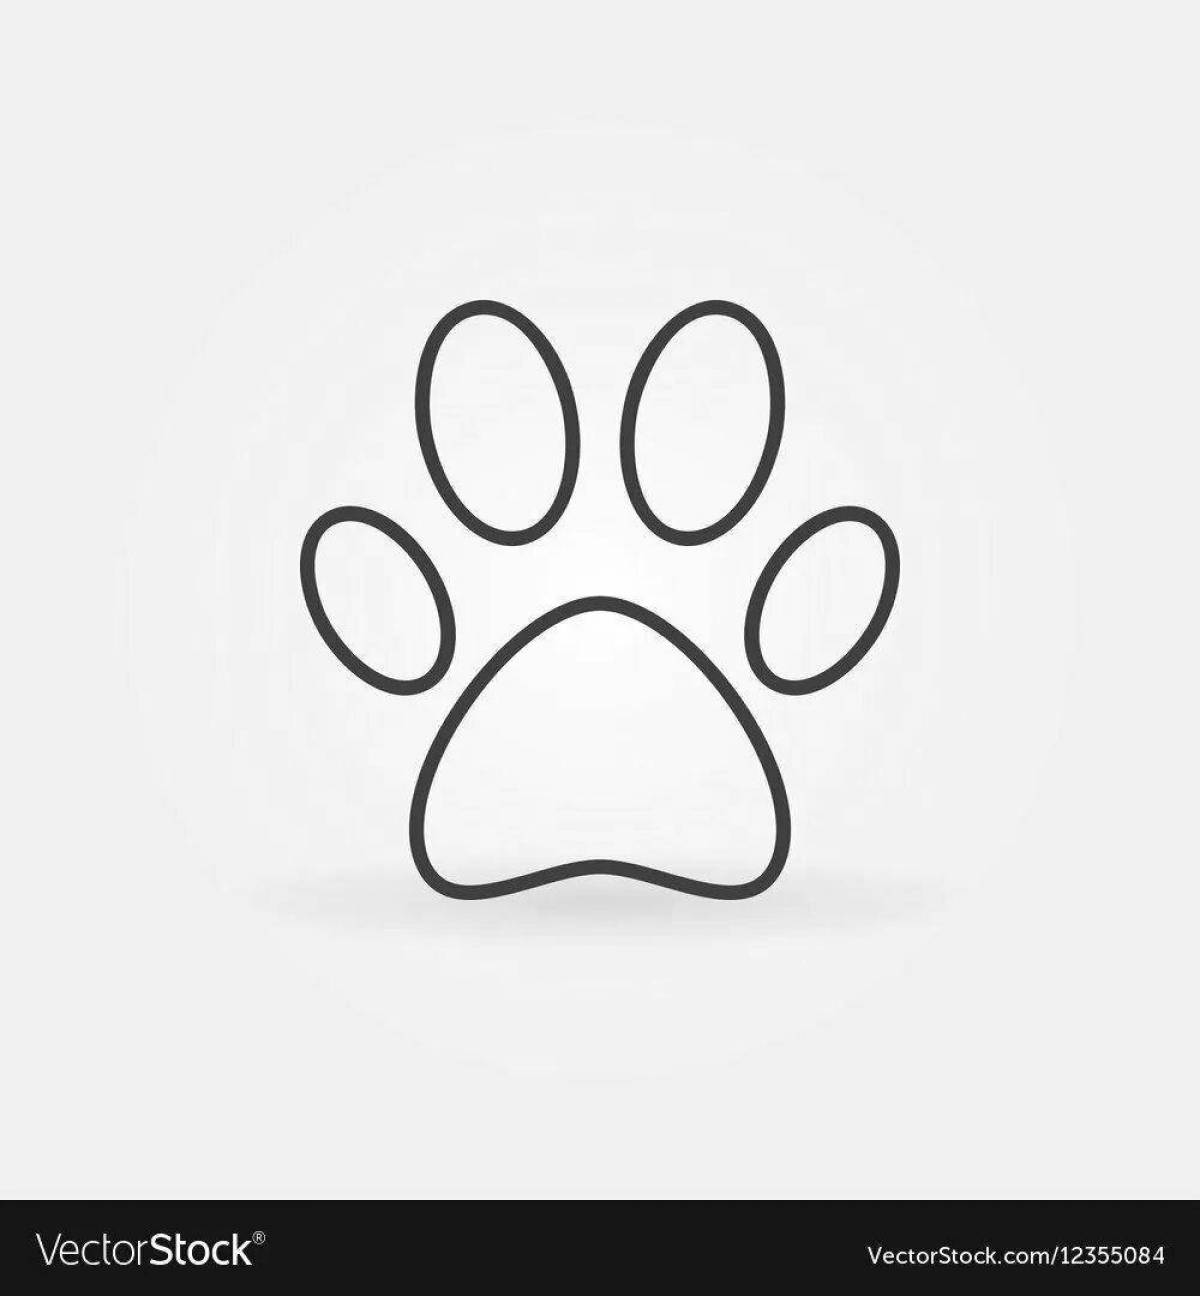 Coloring bright cat's paw